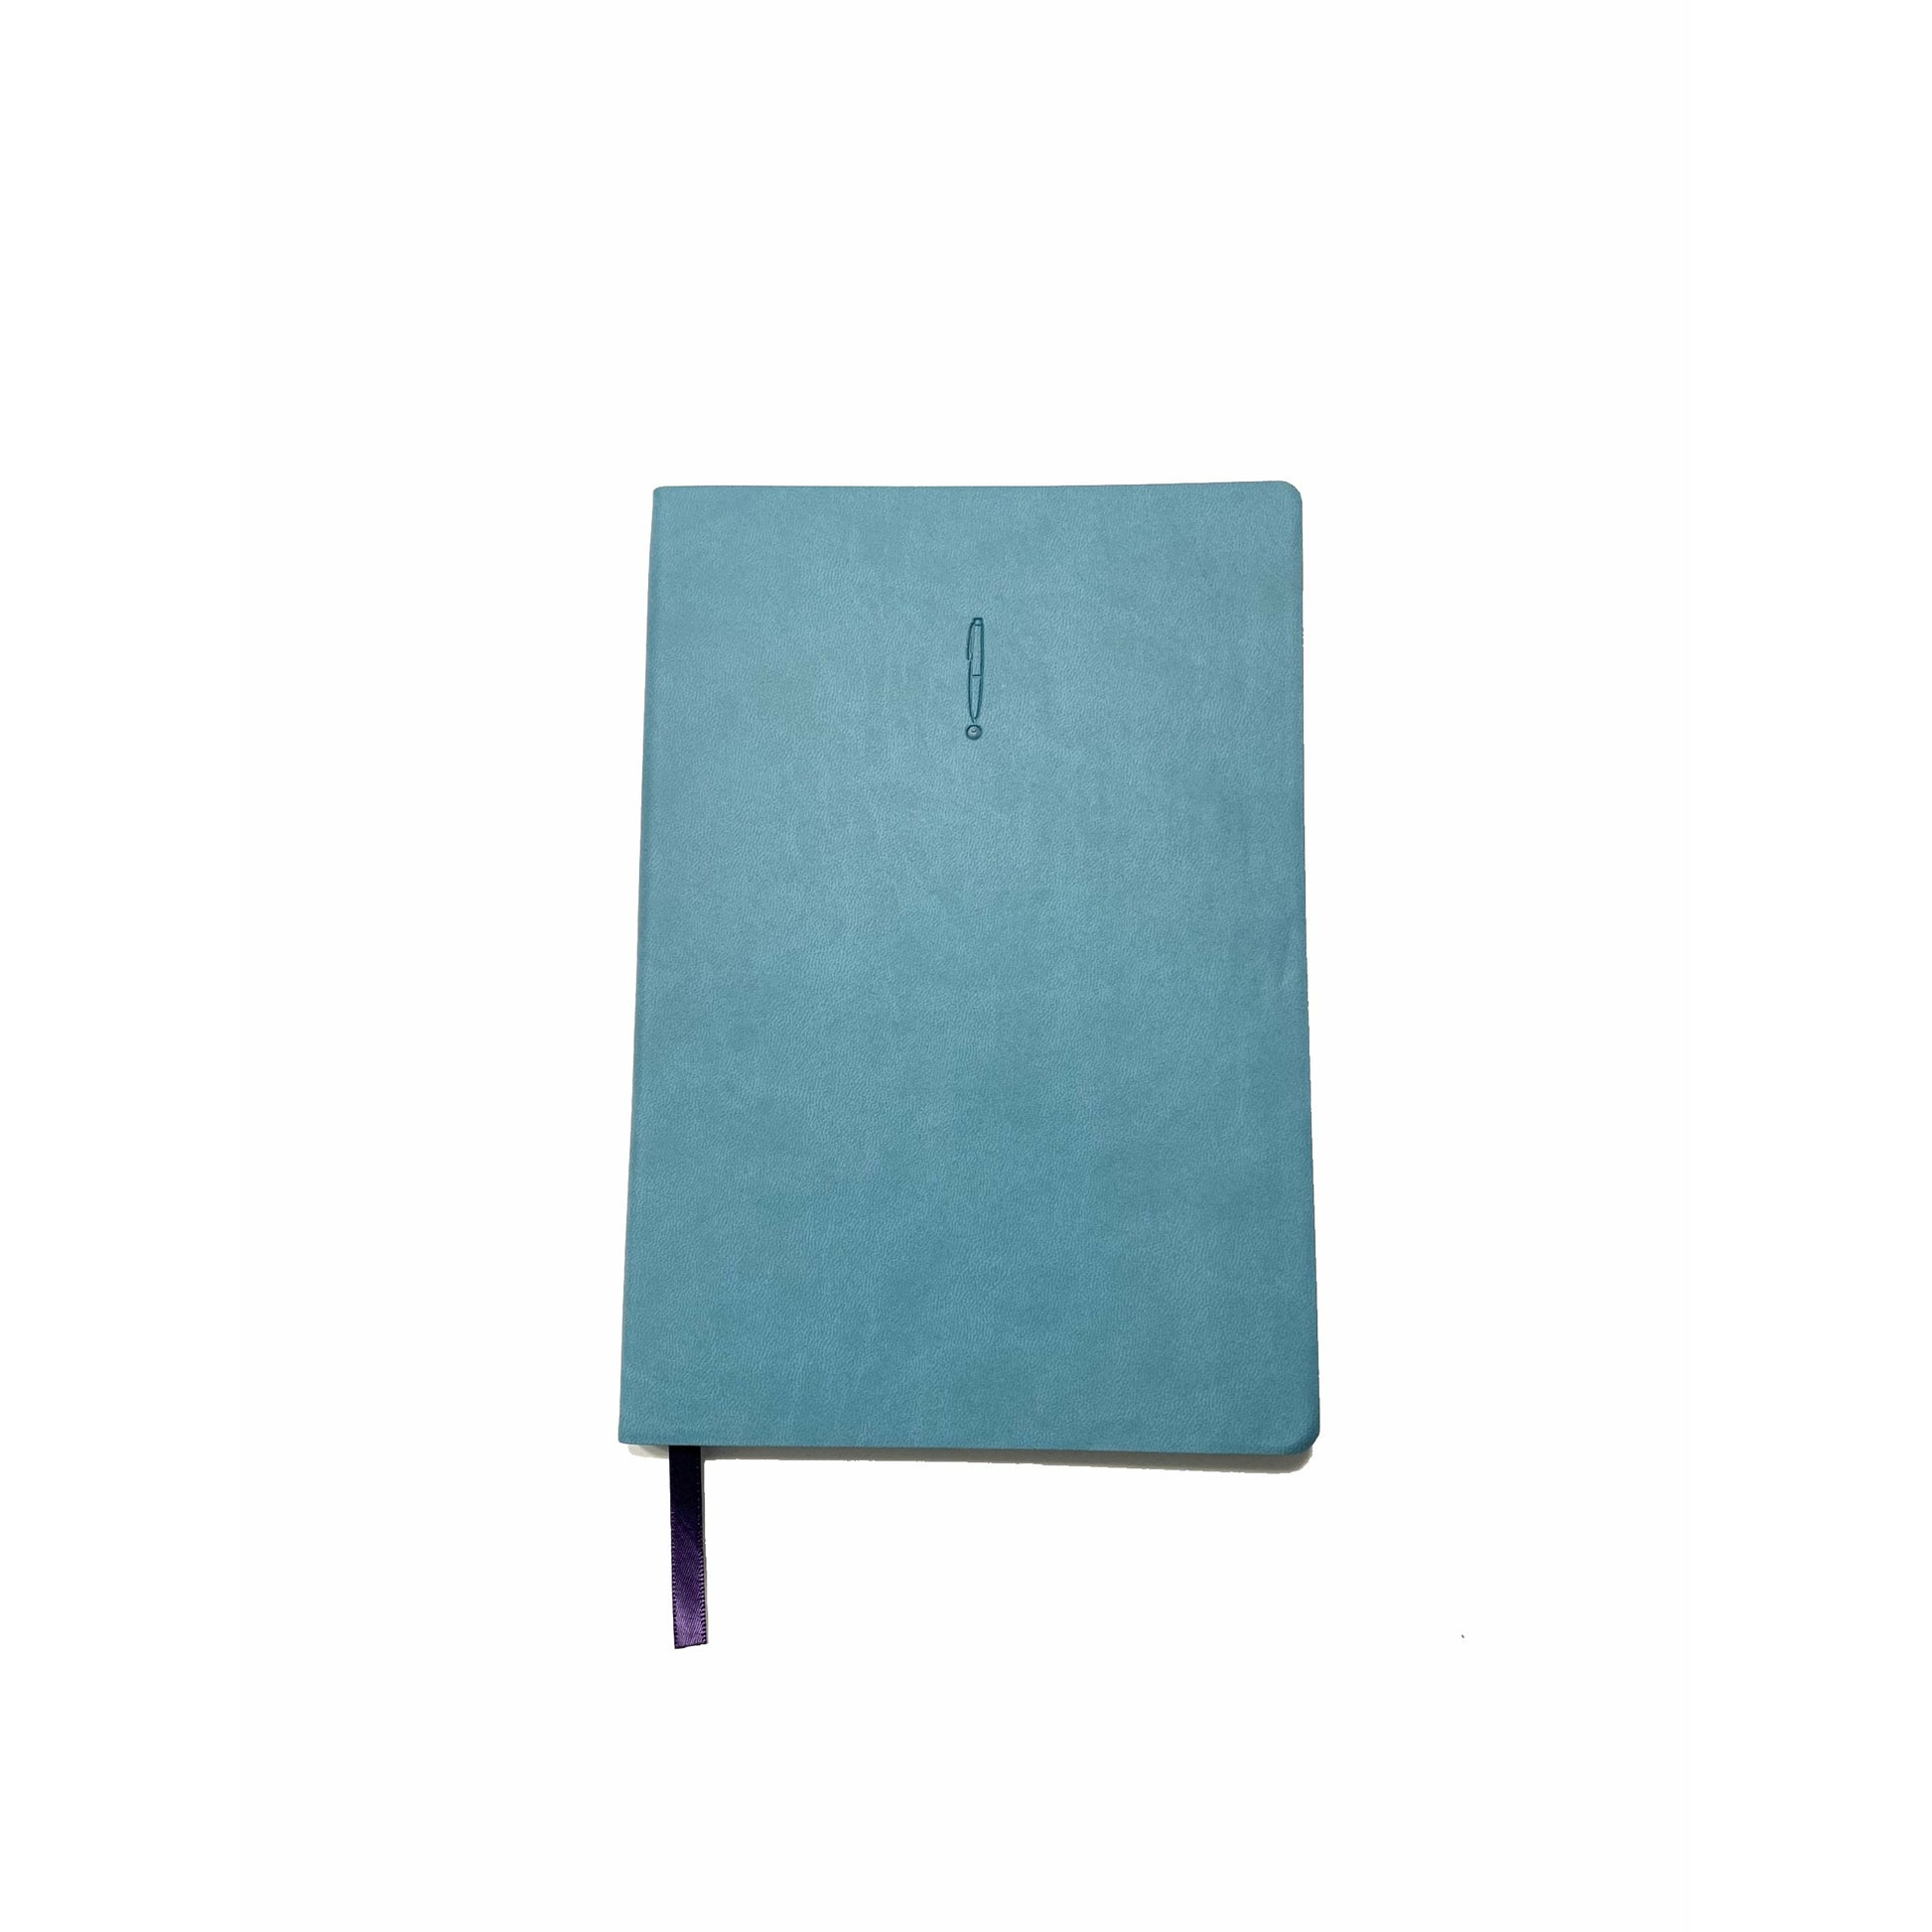 blue or turquoise pu leather journal with purple satin ribbon and Write Mind pen logo on front